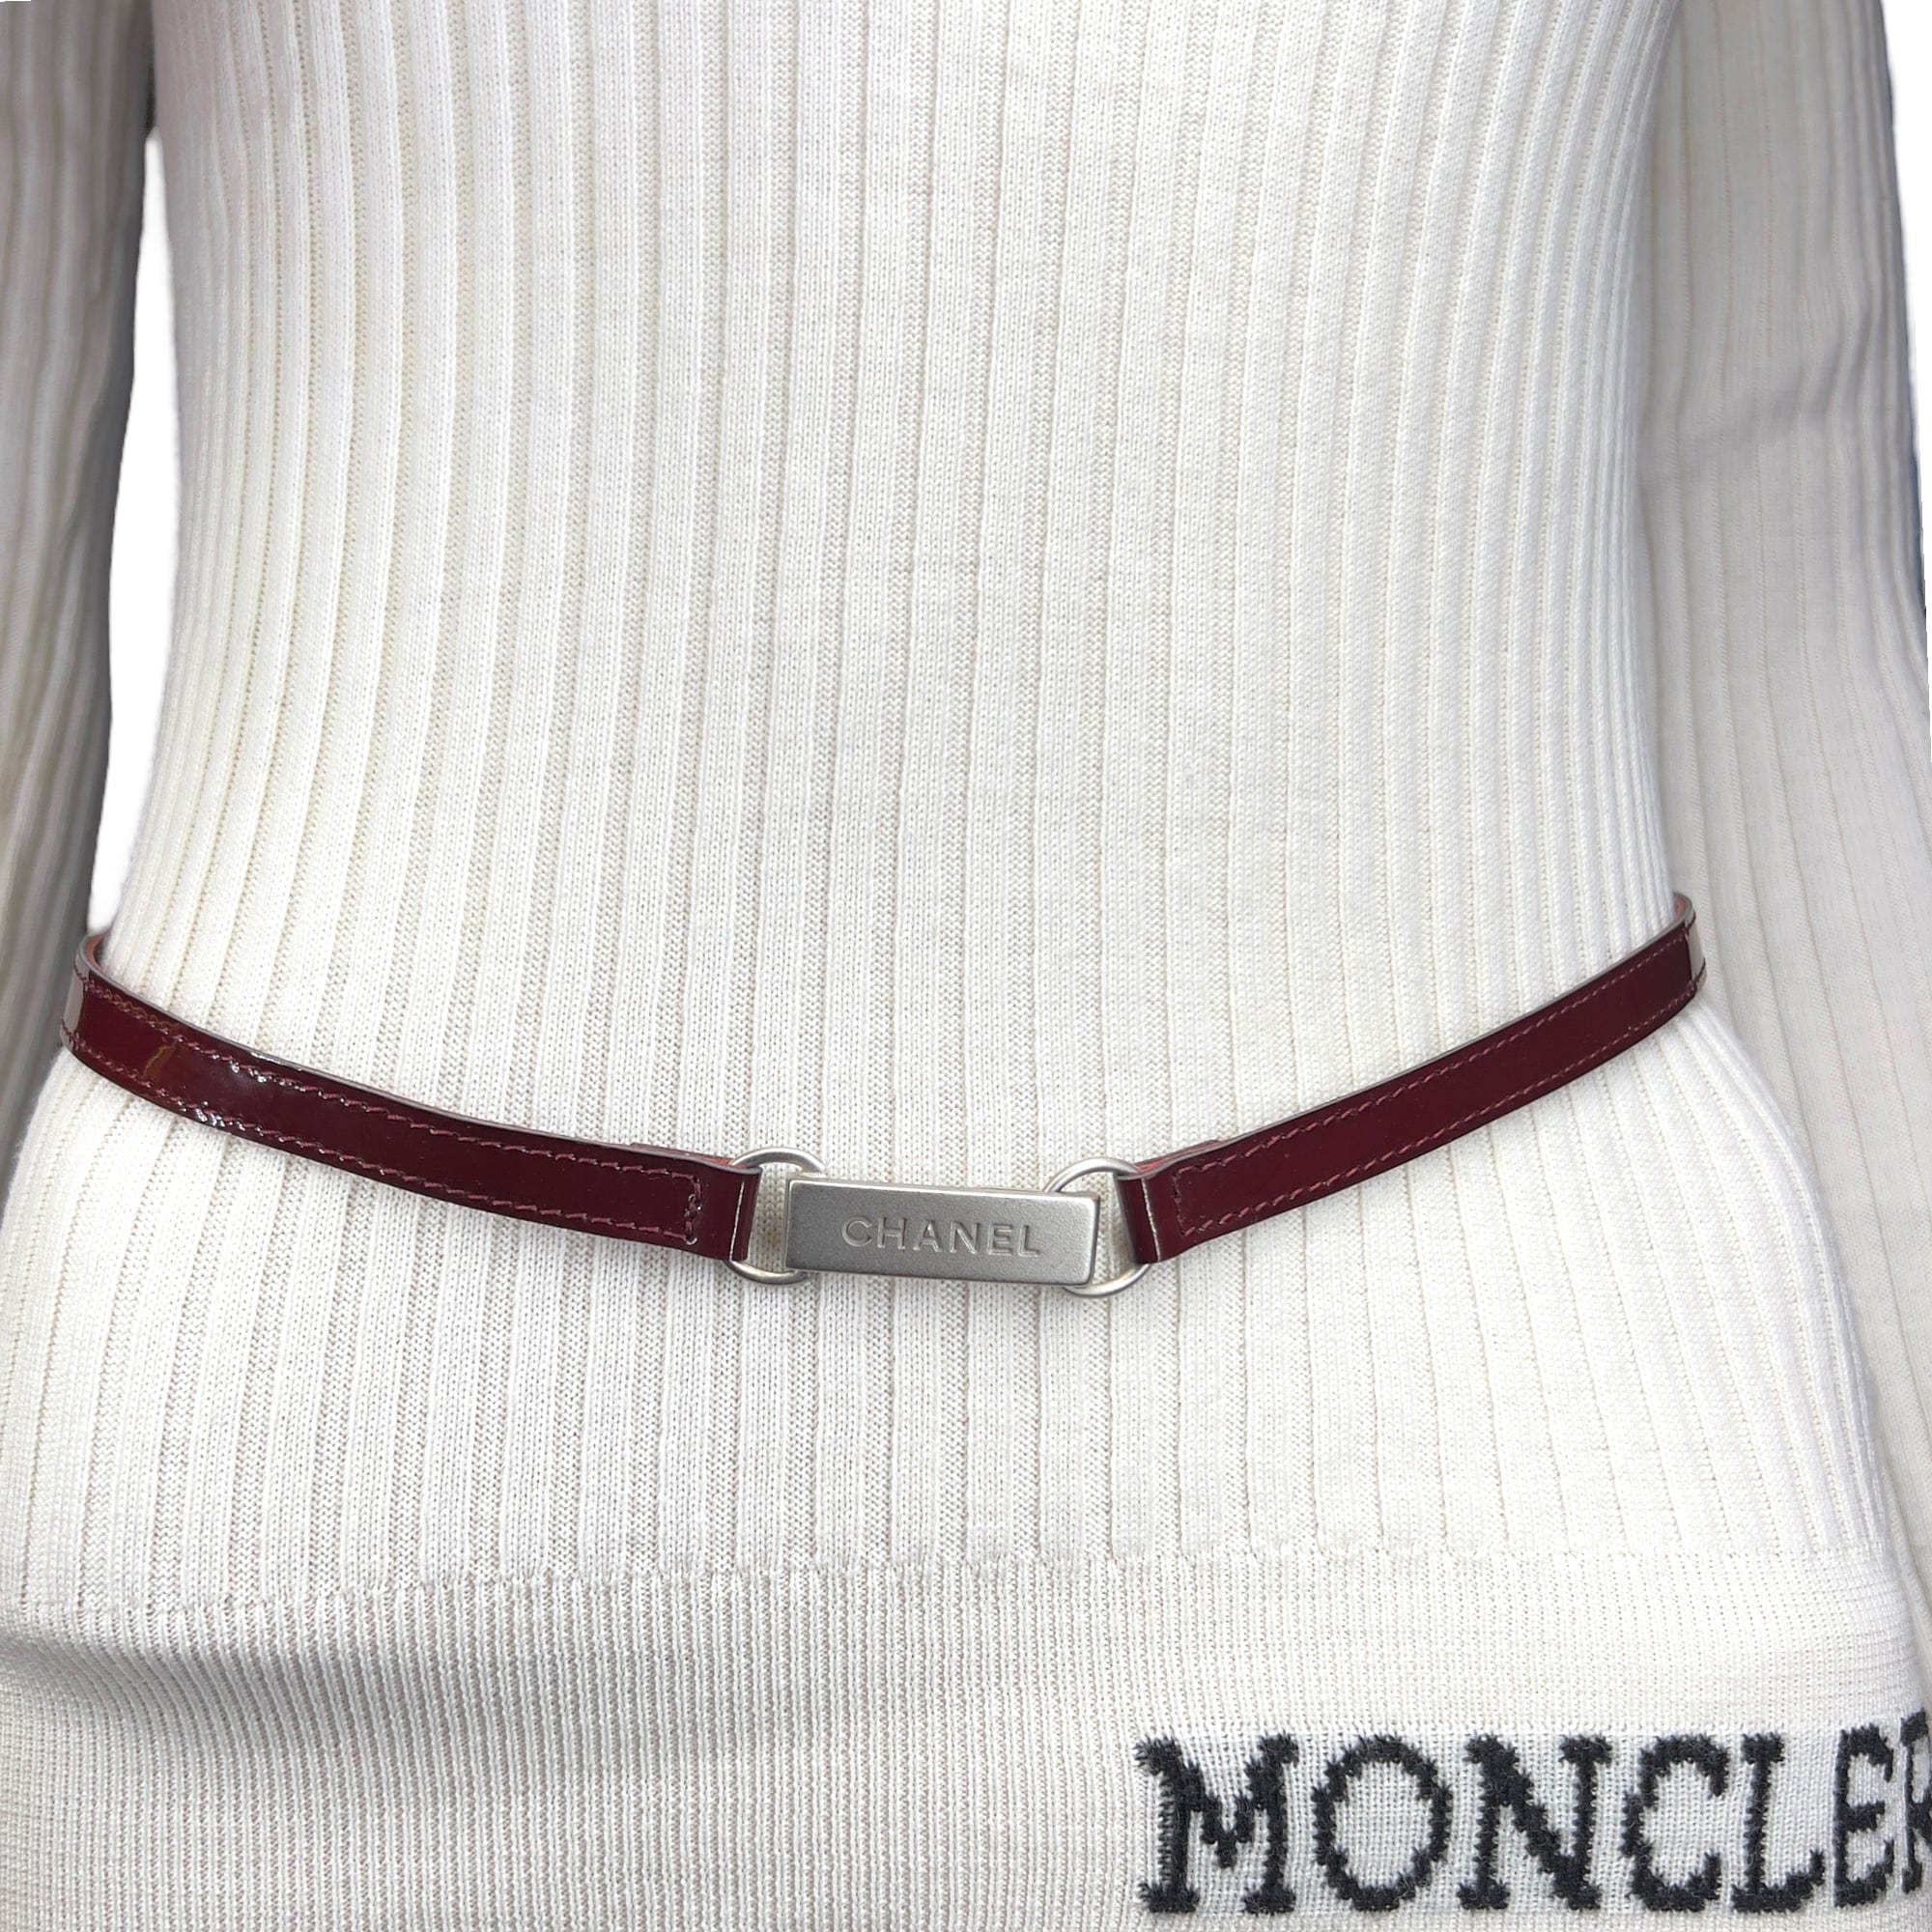 Chanel Thin Patent Leather Belt with CC Logo Clasp - Burgundy